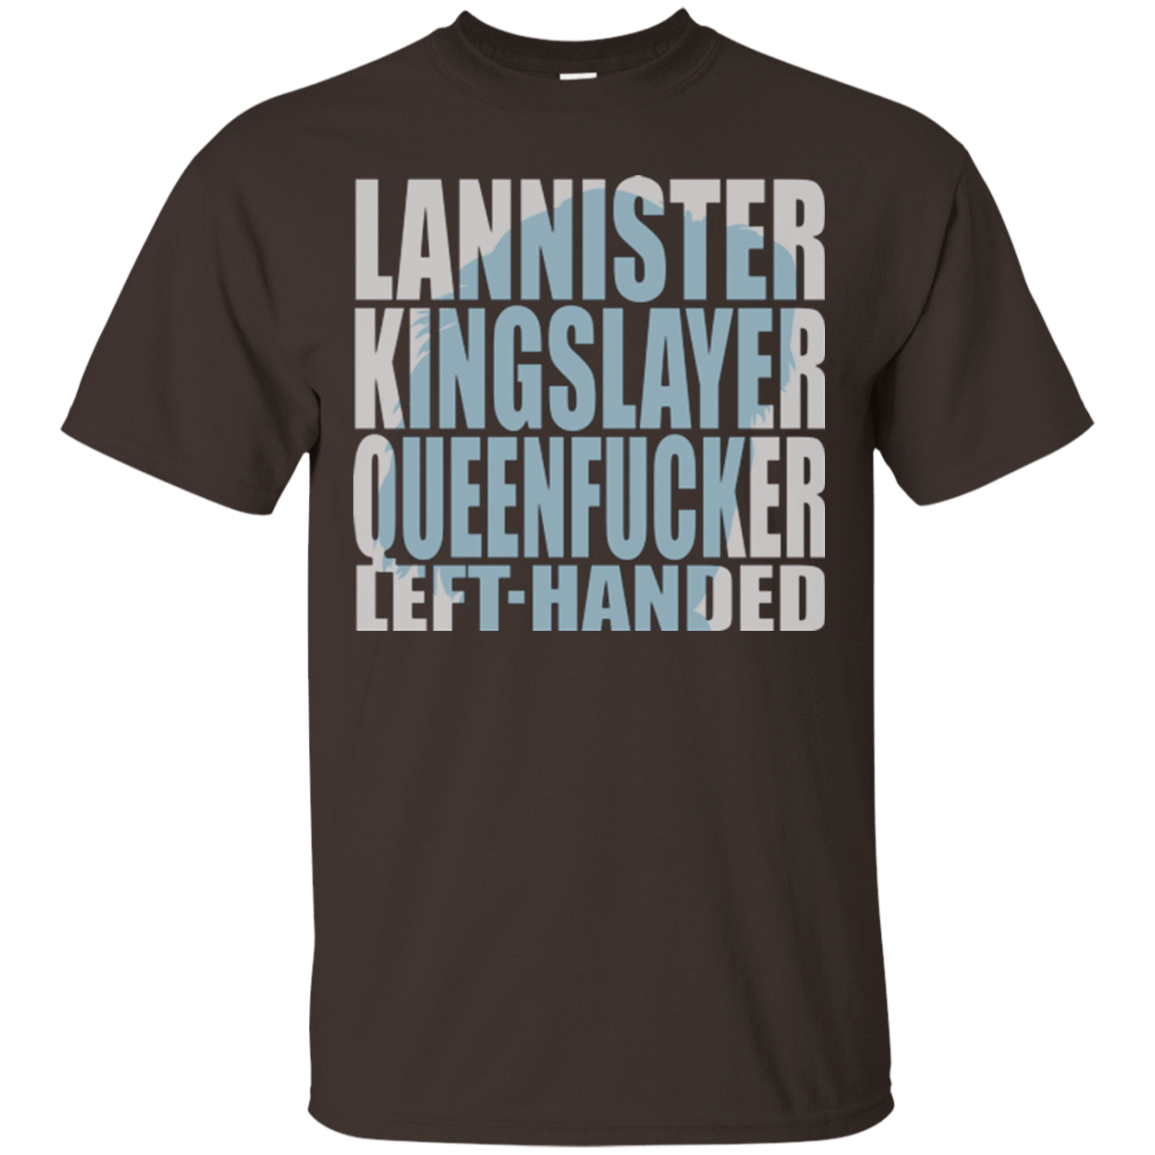 T-Shirts Dark Chocolate / Small Lannister Left Handed T-Shirt